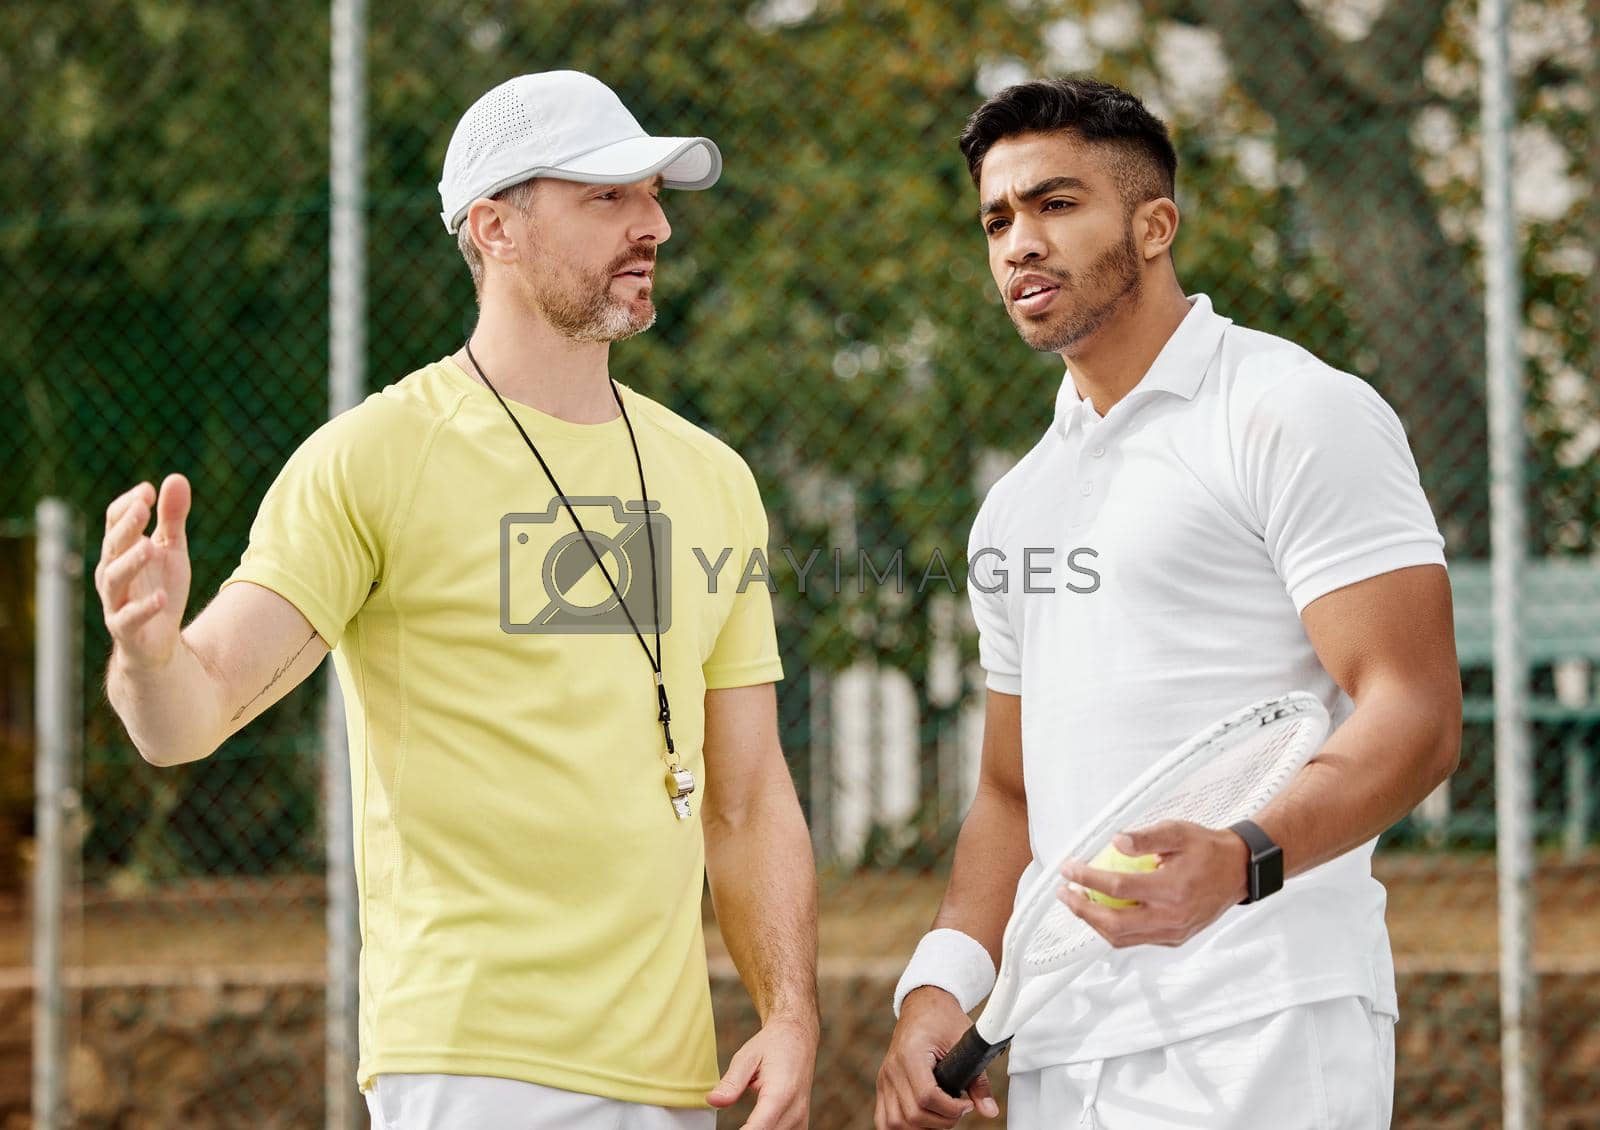 Royalty free image of Whats the best course of action here. a handsome male coach giving instructions to his younger tennis student on a court. by YuriArcurs